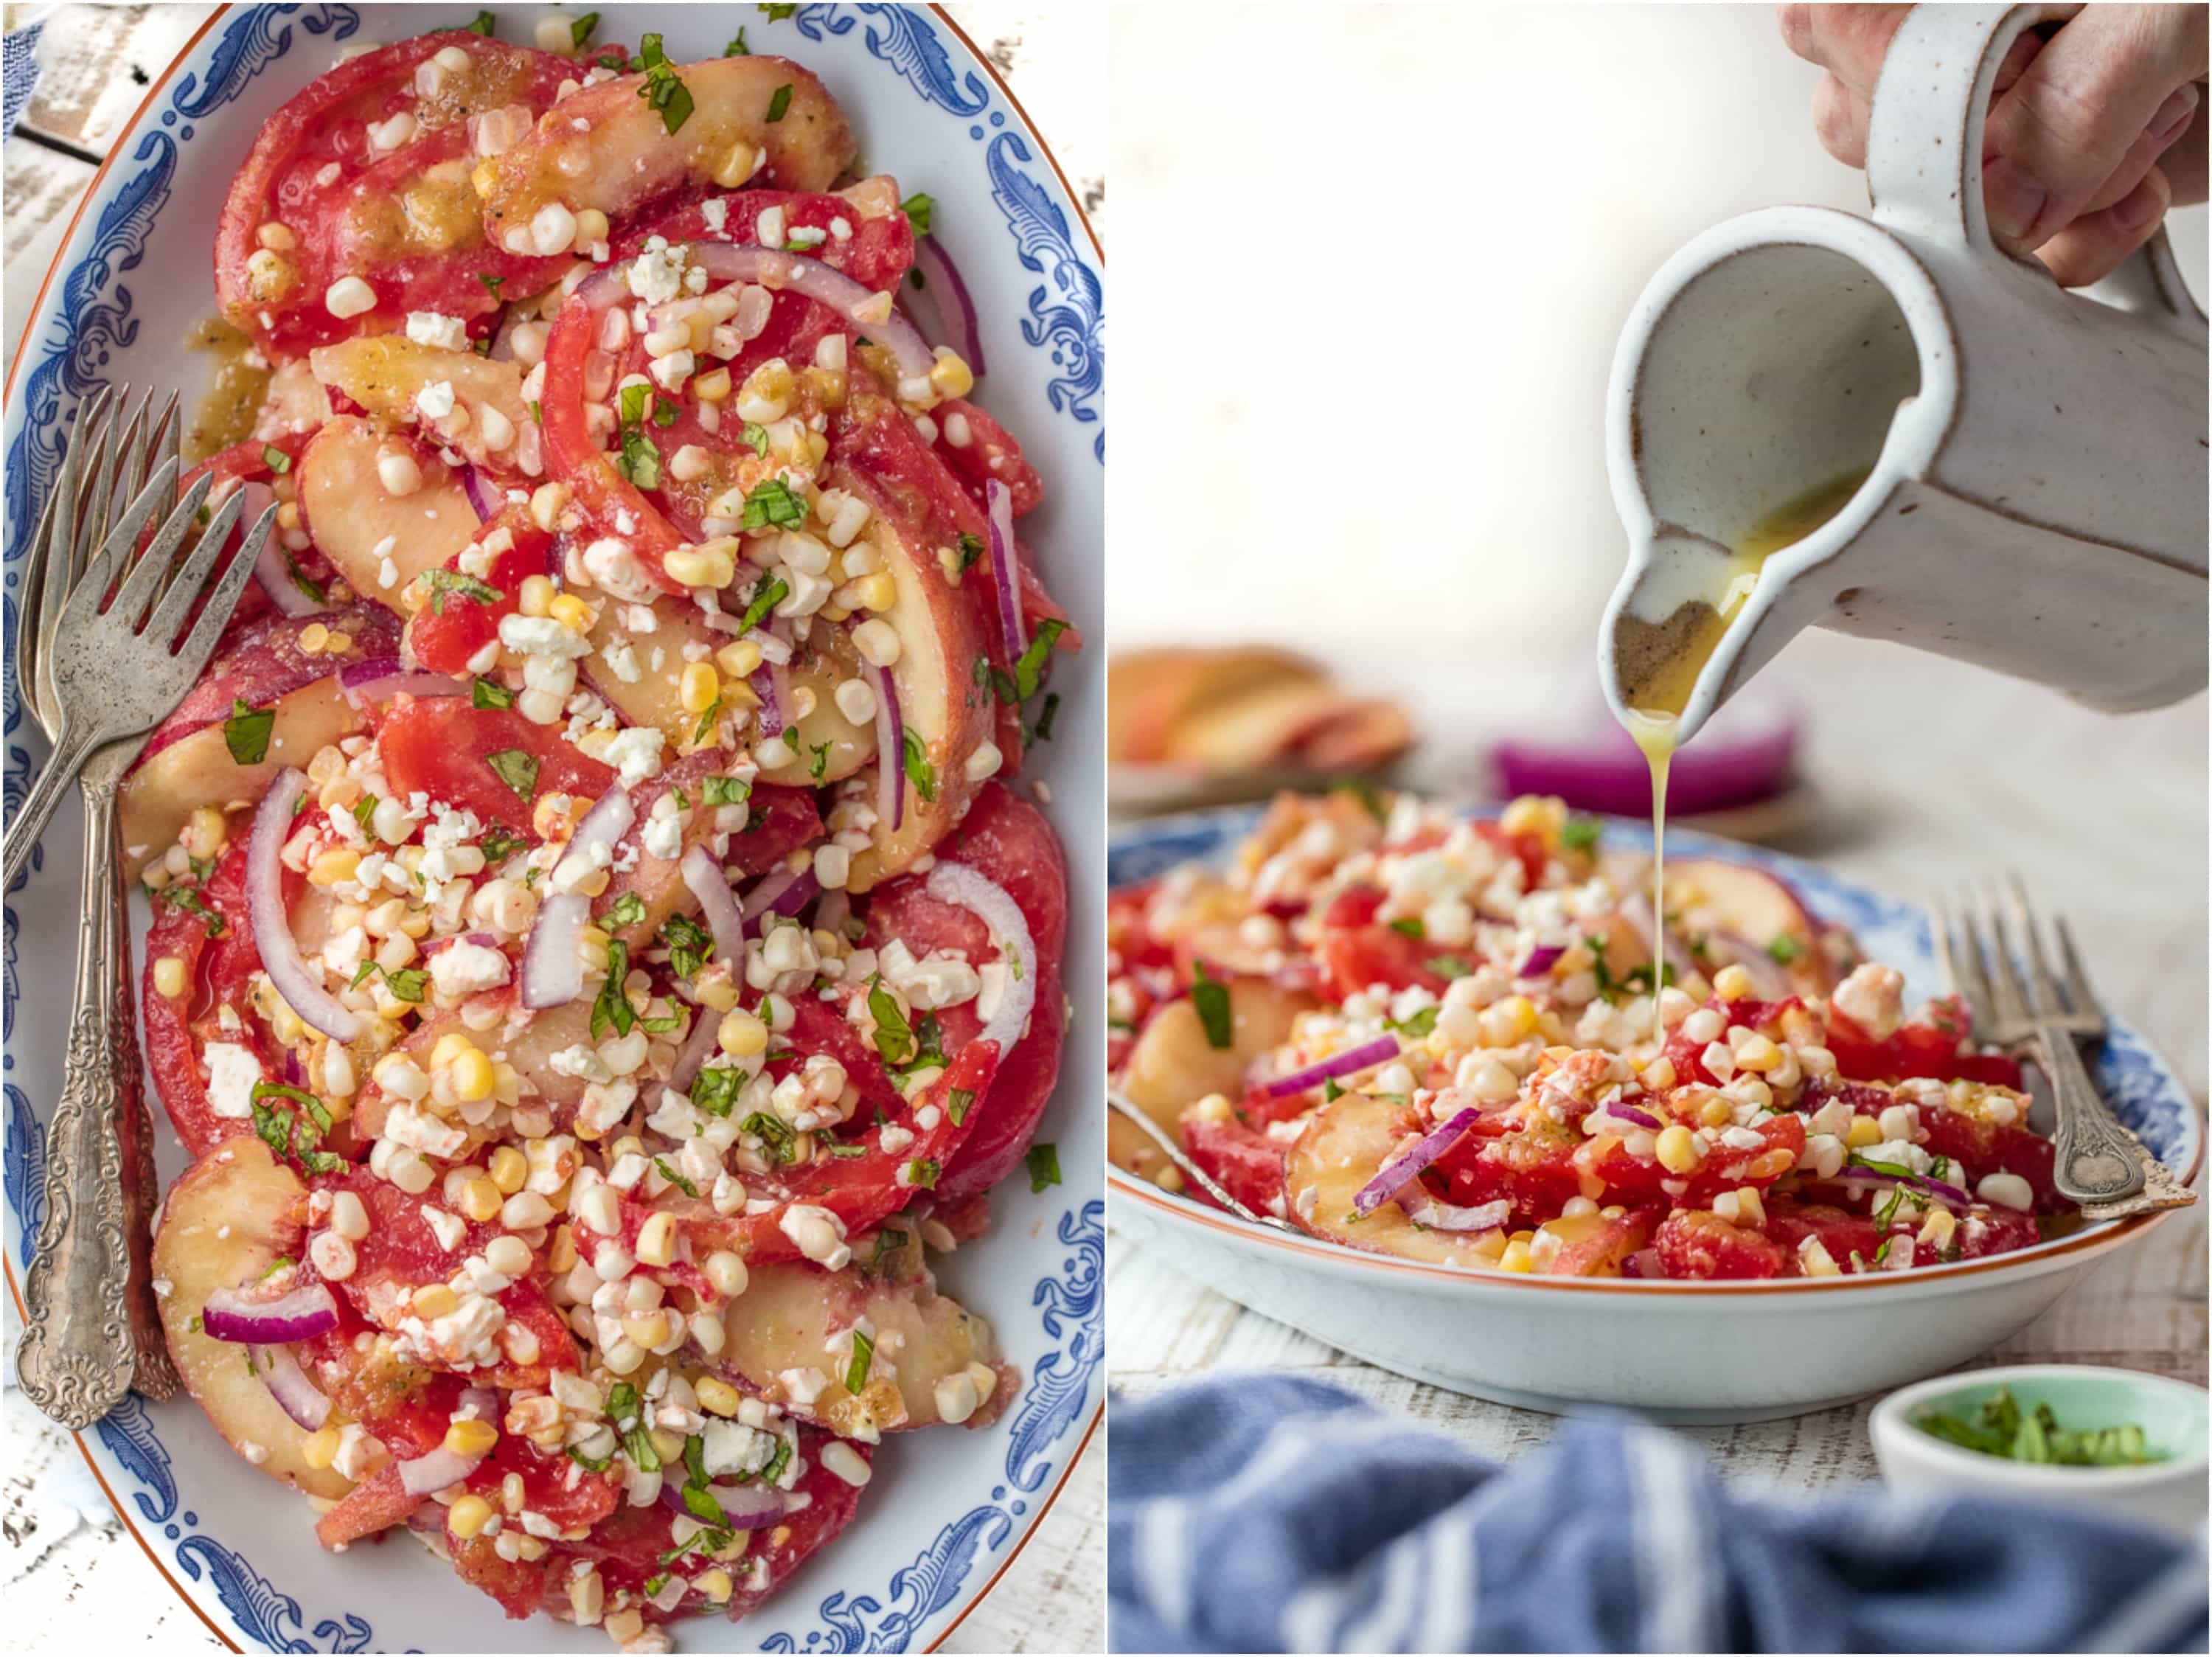 This PEACH TOMATO CORN SALAD WITH SPICY HONEY VINAIGRETTE is so fresh, delicious, and easy. Make it as a side or a meal, its delicious throughout the day. SO MUCH FLAVOR.